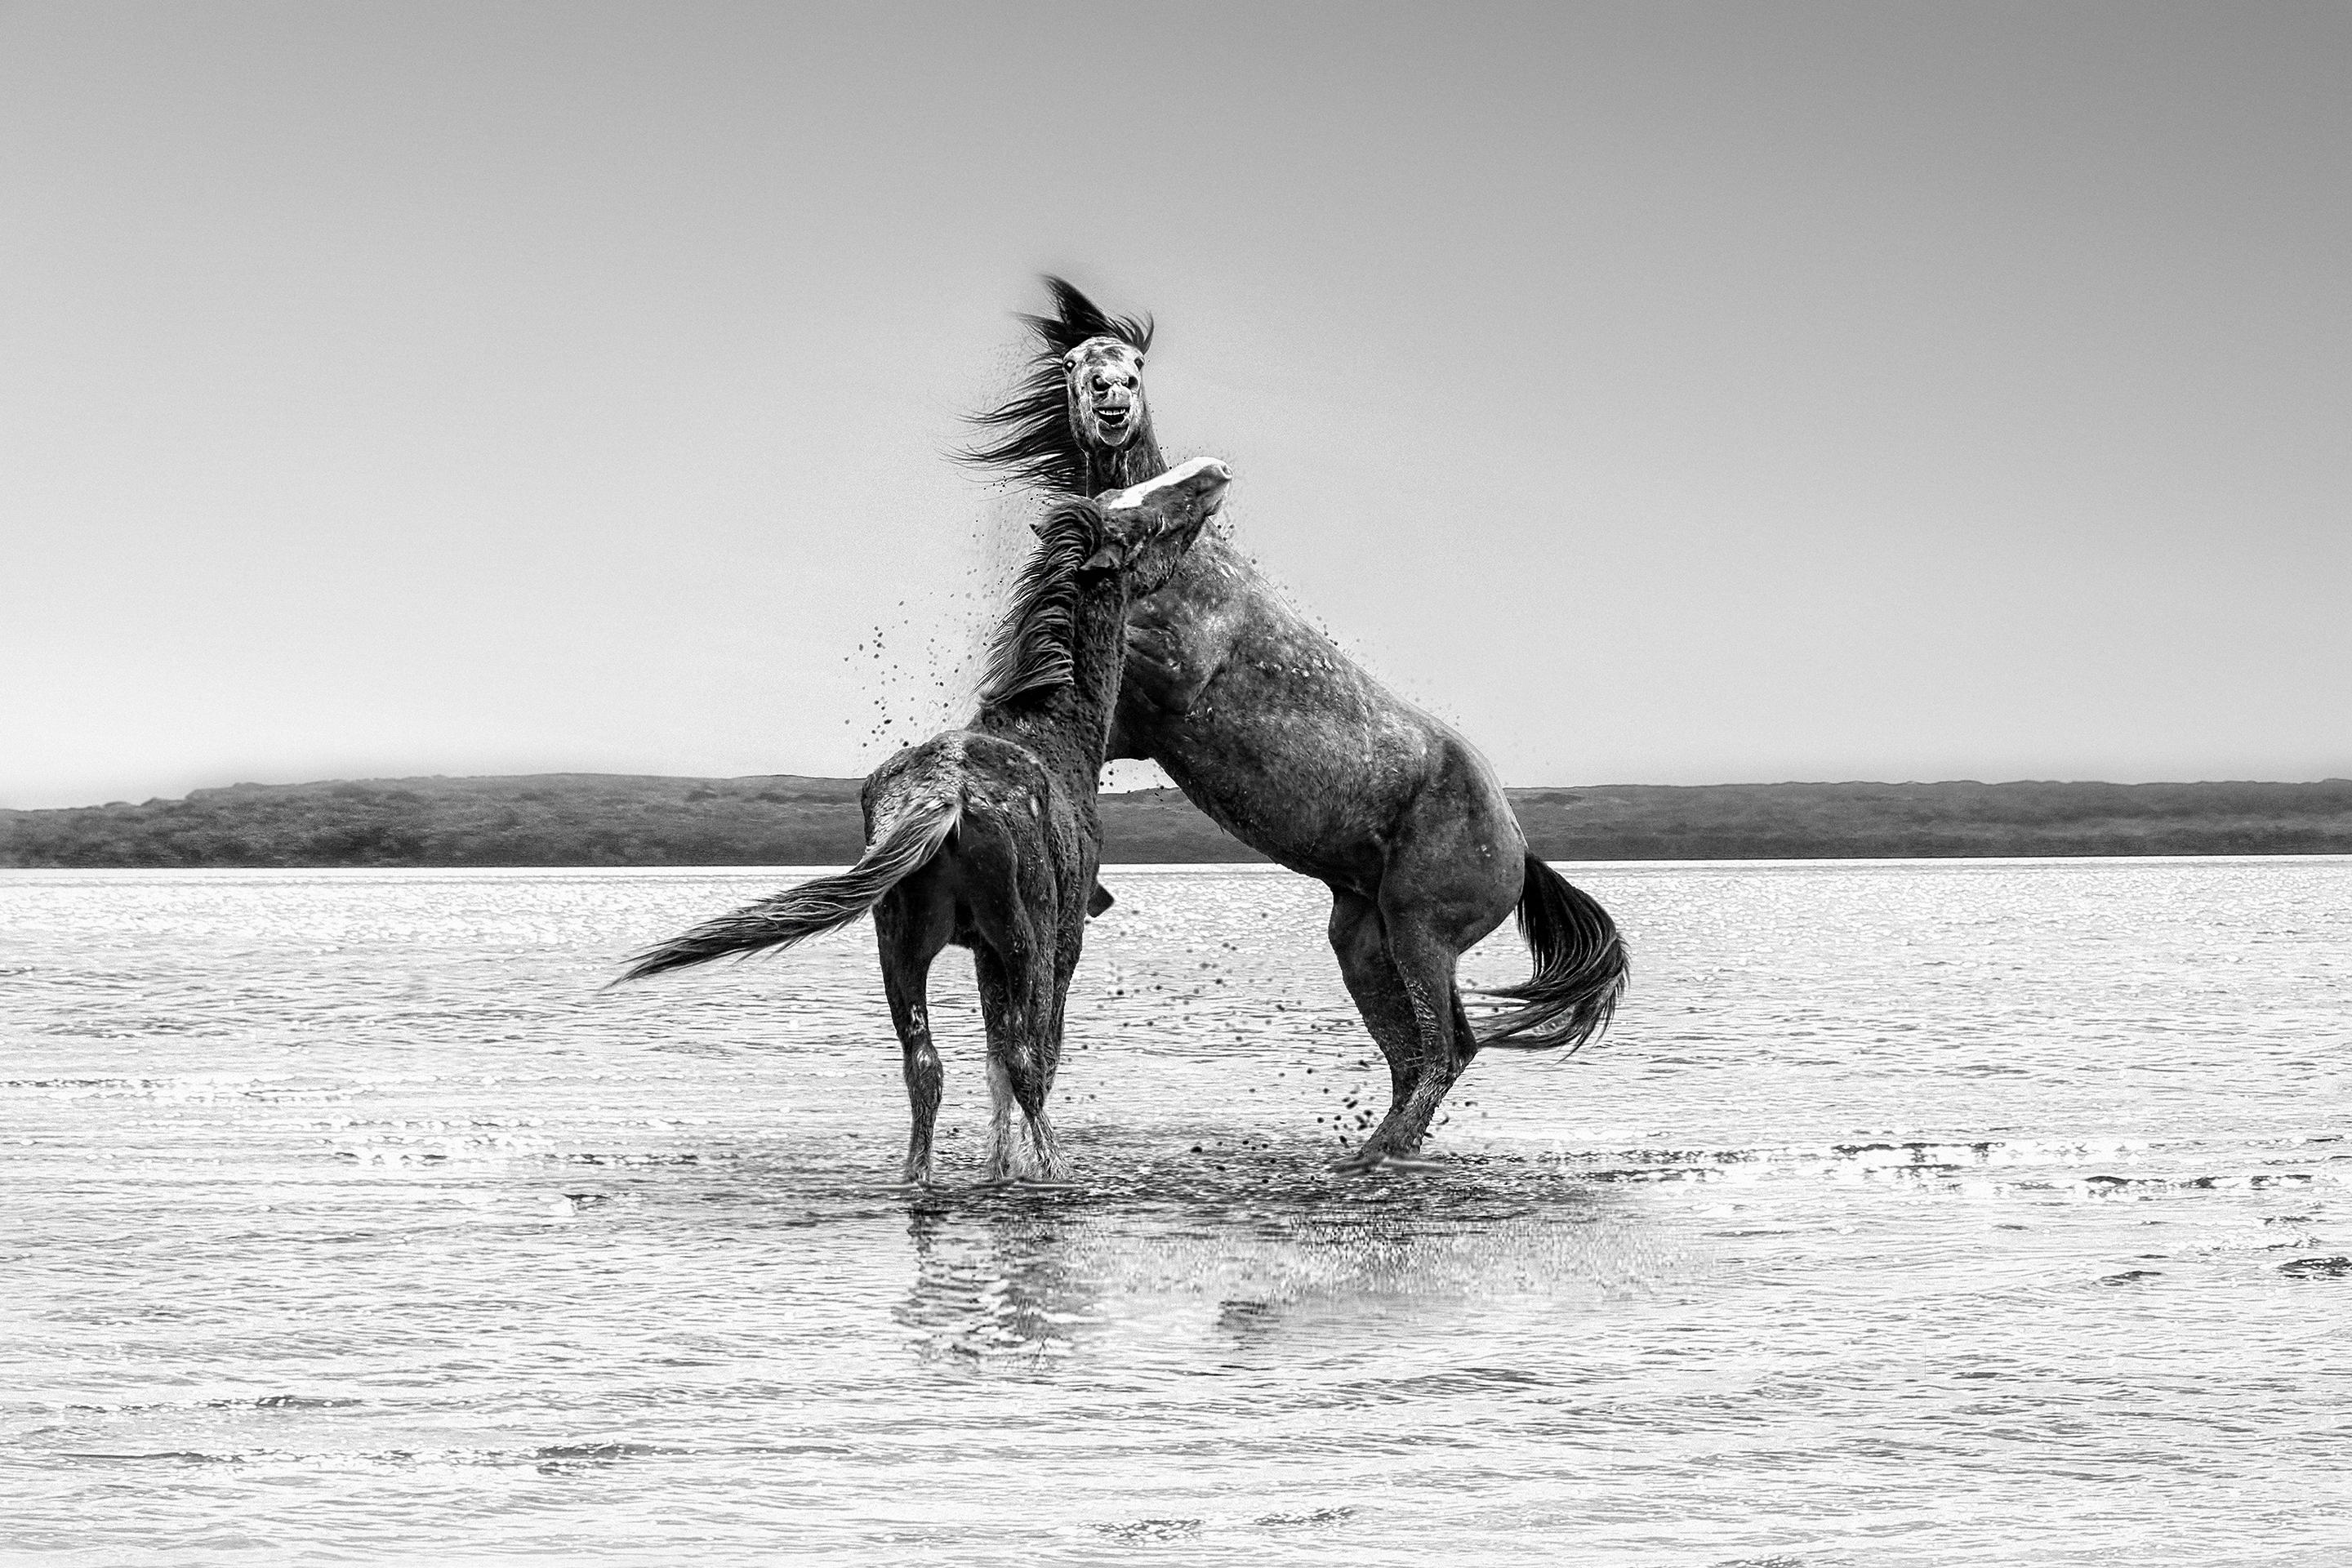 Shane Russeck Landscape Photograph - The Pugilist - 36x48 Contemporary Black and White Photography of Wild Horses